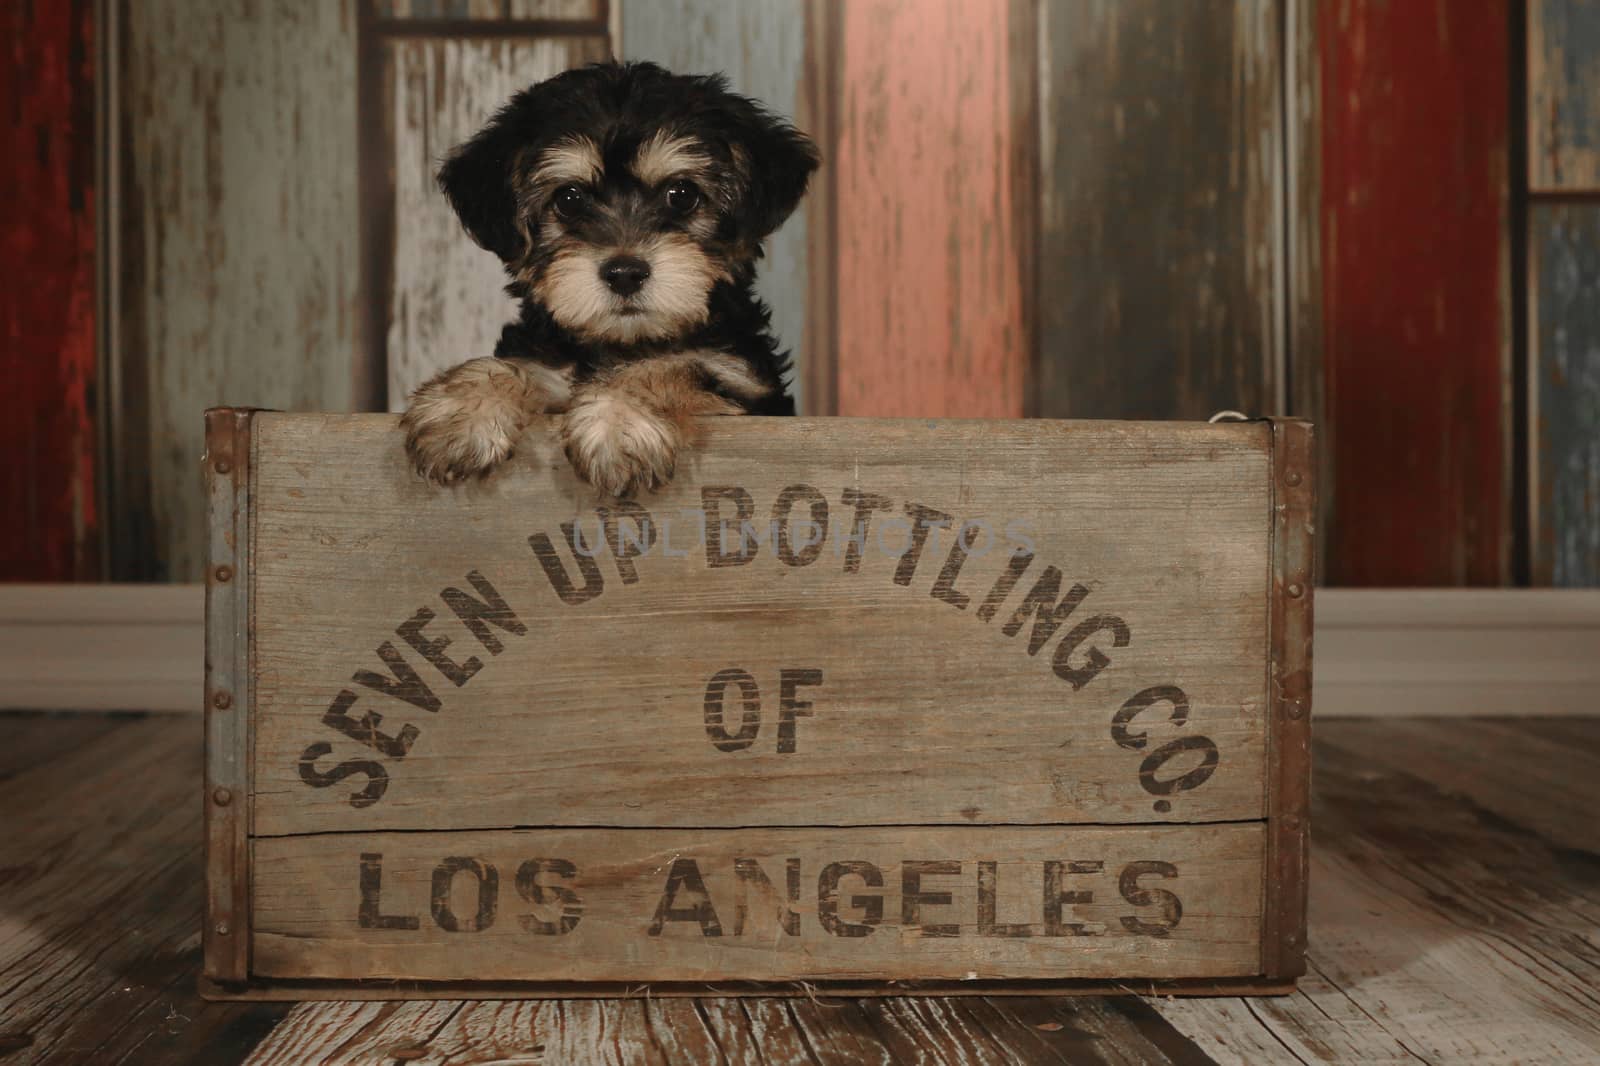 Teacup Yorkie Puppy in Adorable Backdrops and Prop for Calendar or Cards